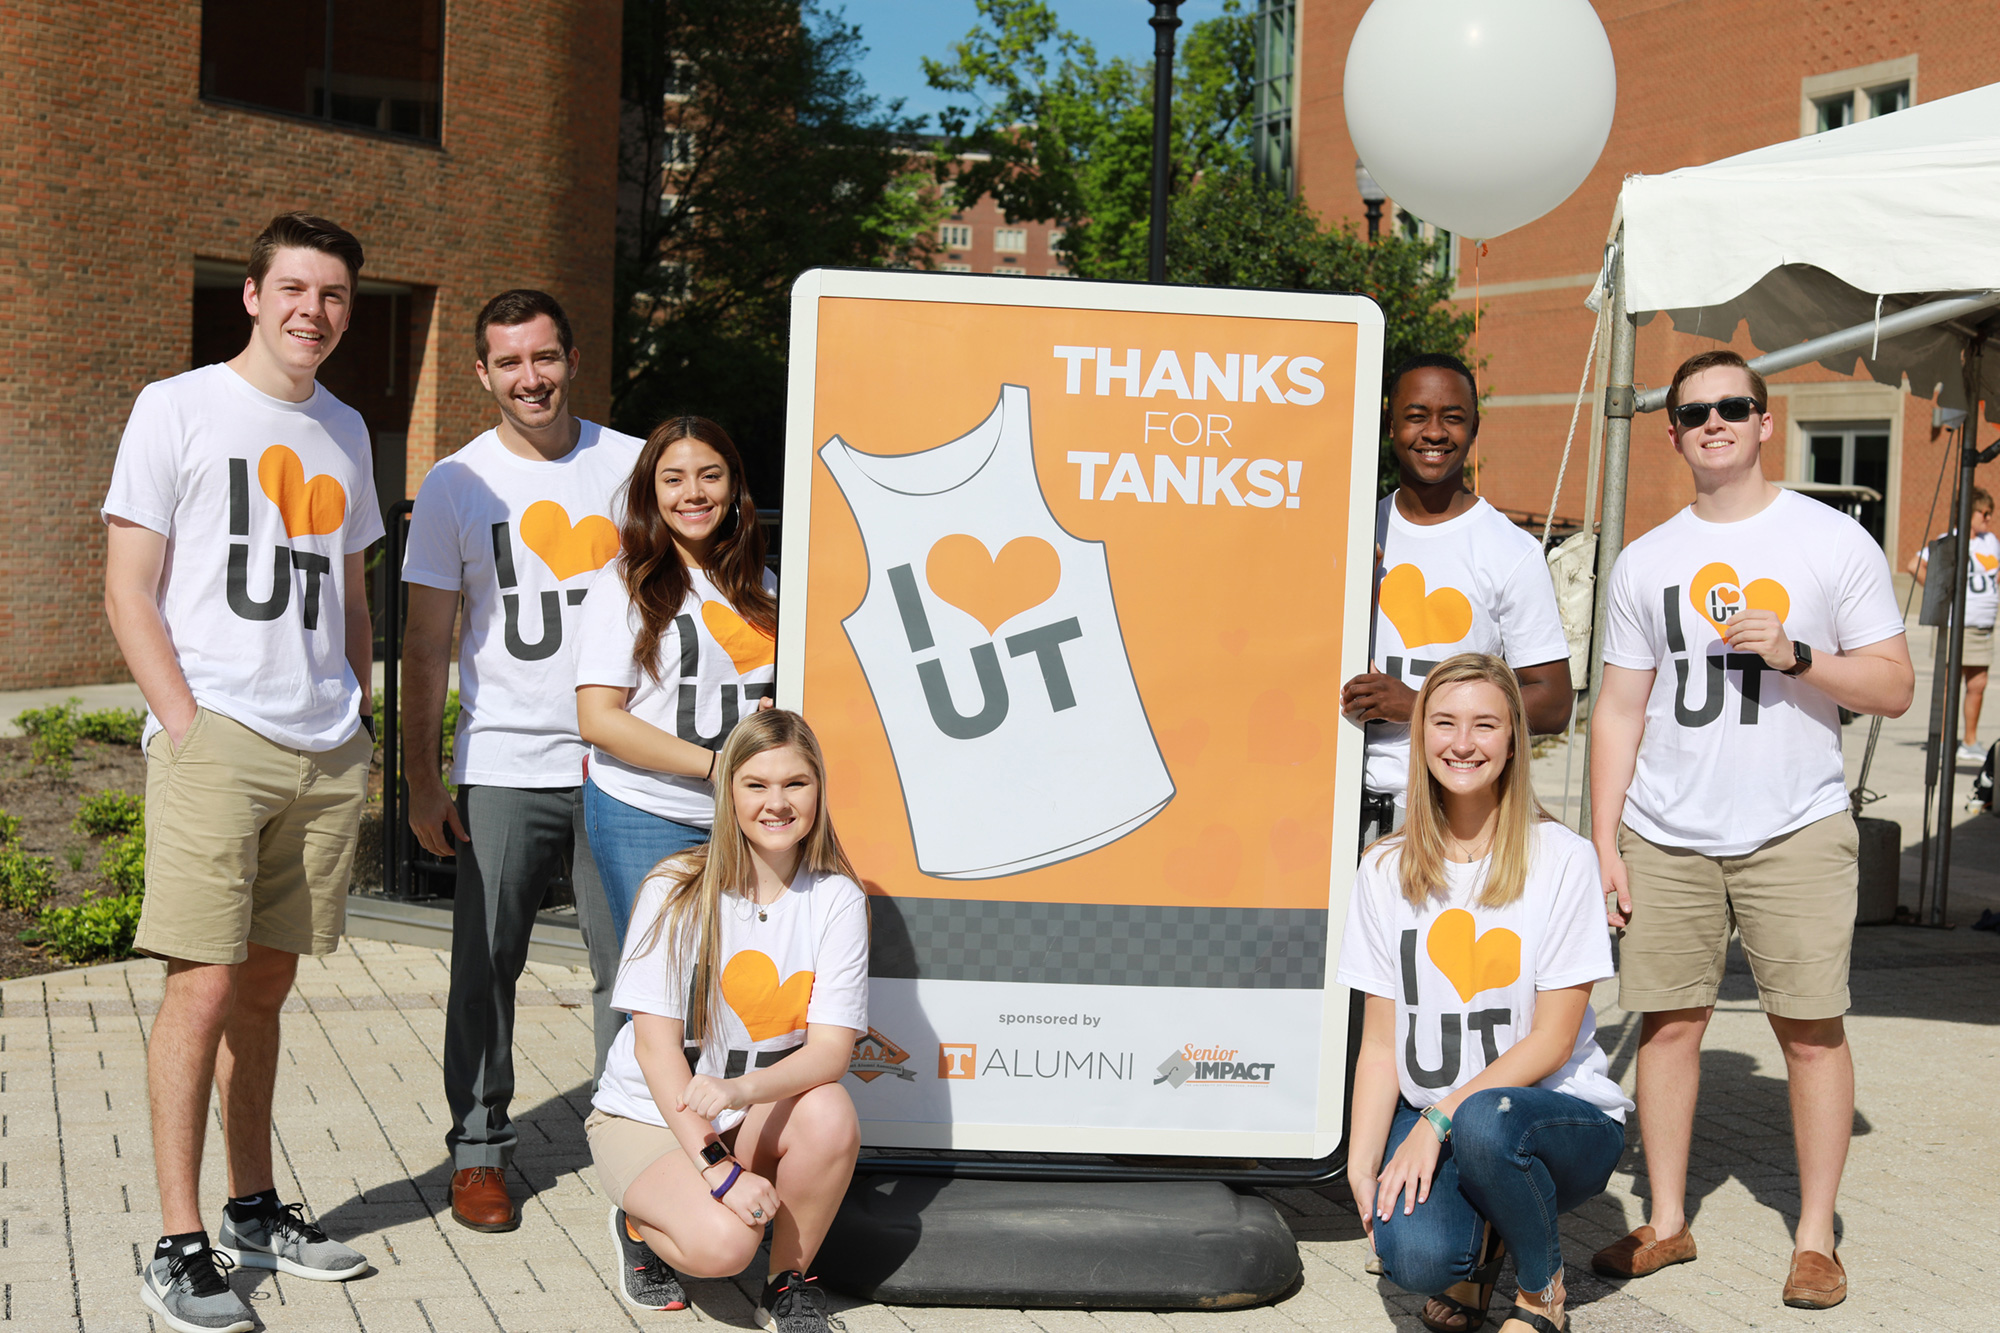 A group of students pictured waring "I Heart UT" shirts.